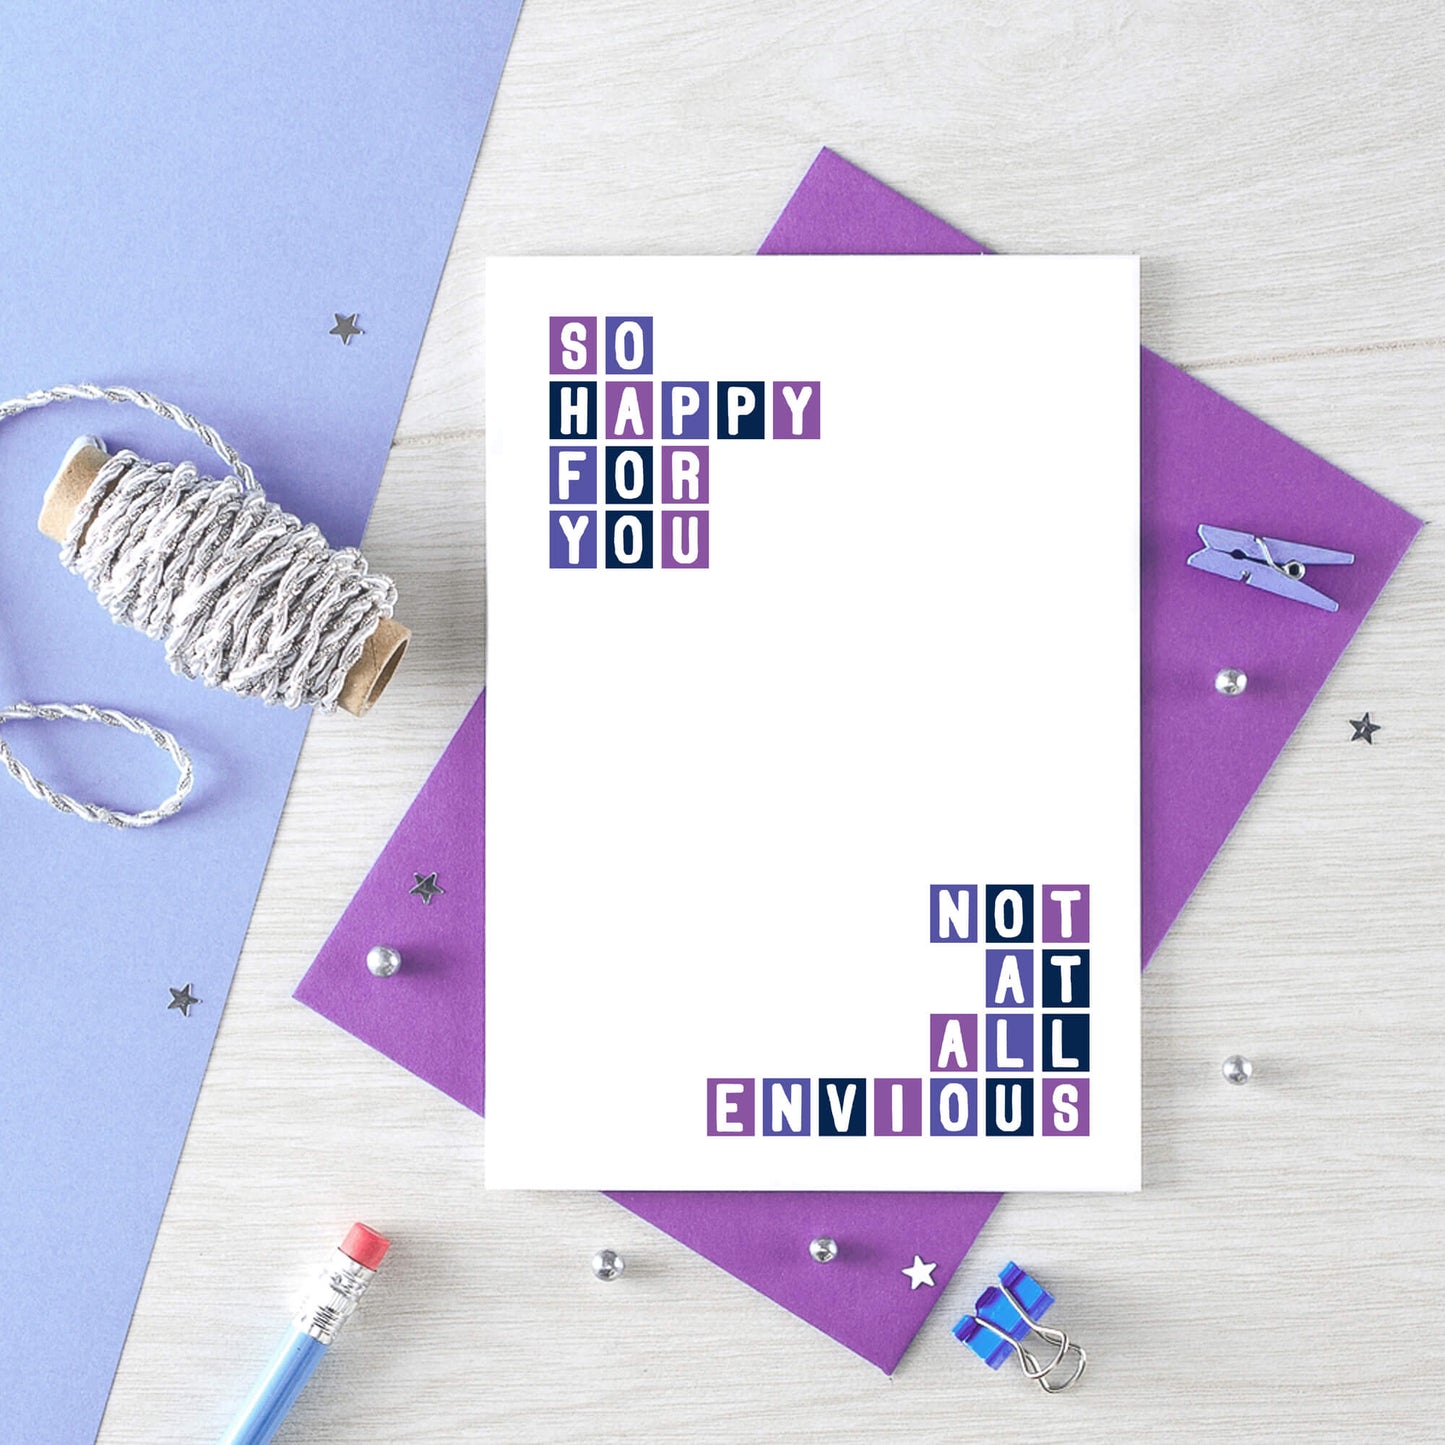 Congratulations Card by SixElevenCreations. Reads So happy for you. Not at all envious. Product Code SE0323A6